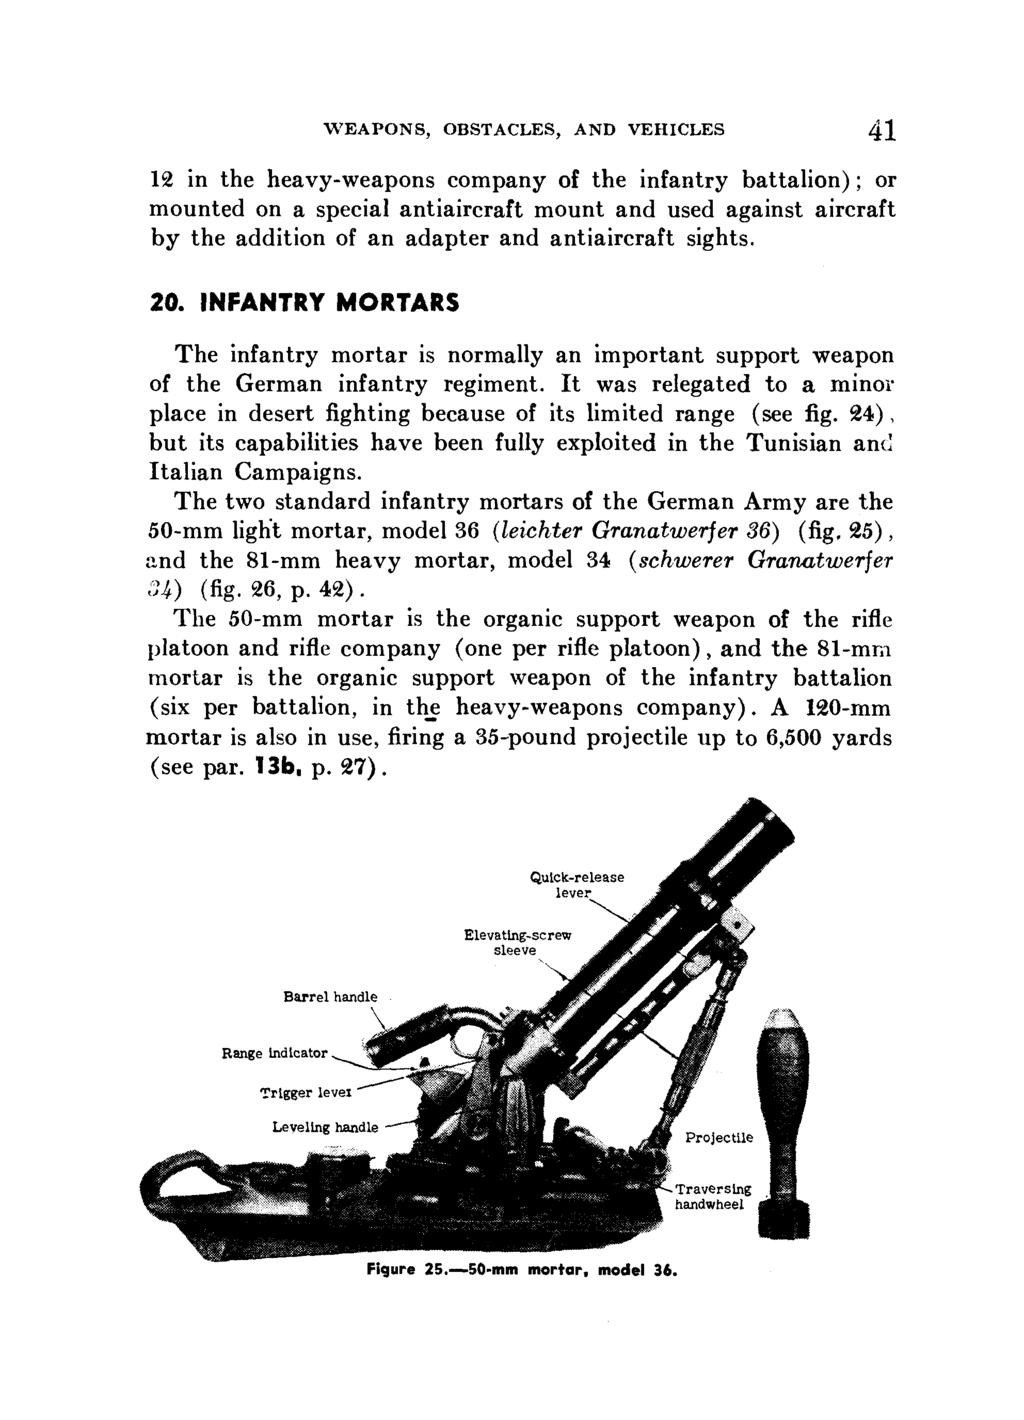 WEAPONS, OBSTACLES, AND VEHICLES 41 12 in the heavy-weapons company of the infantry battalion); or mounted on a special antiaircraft mount and used against aircraft by the addition of an adapter and